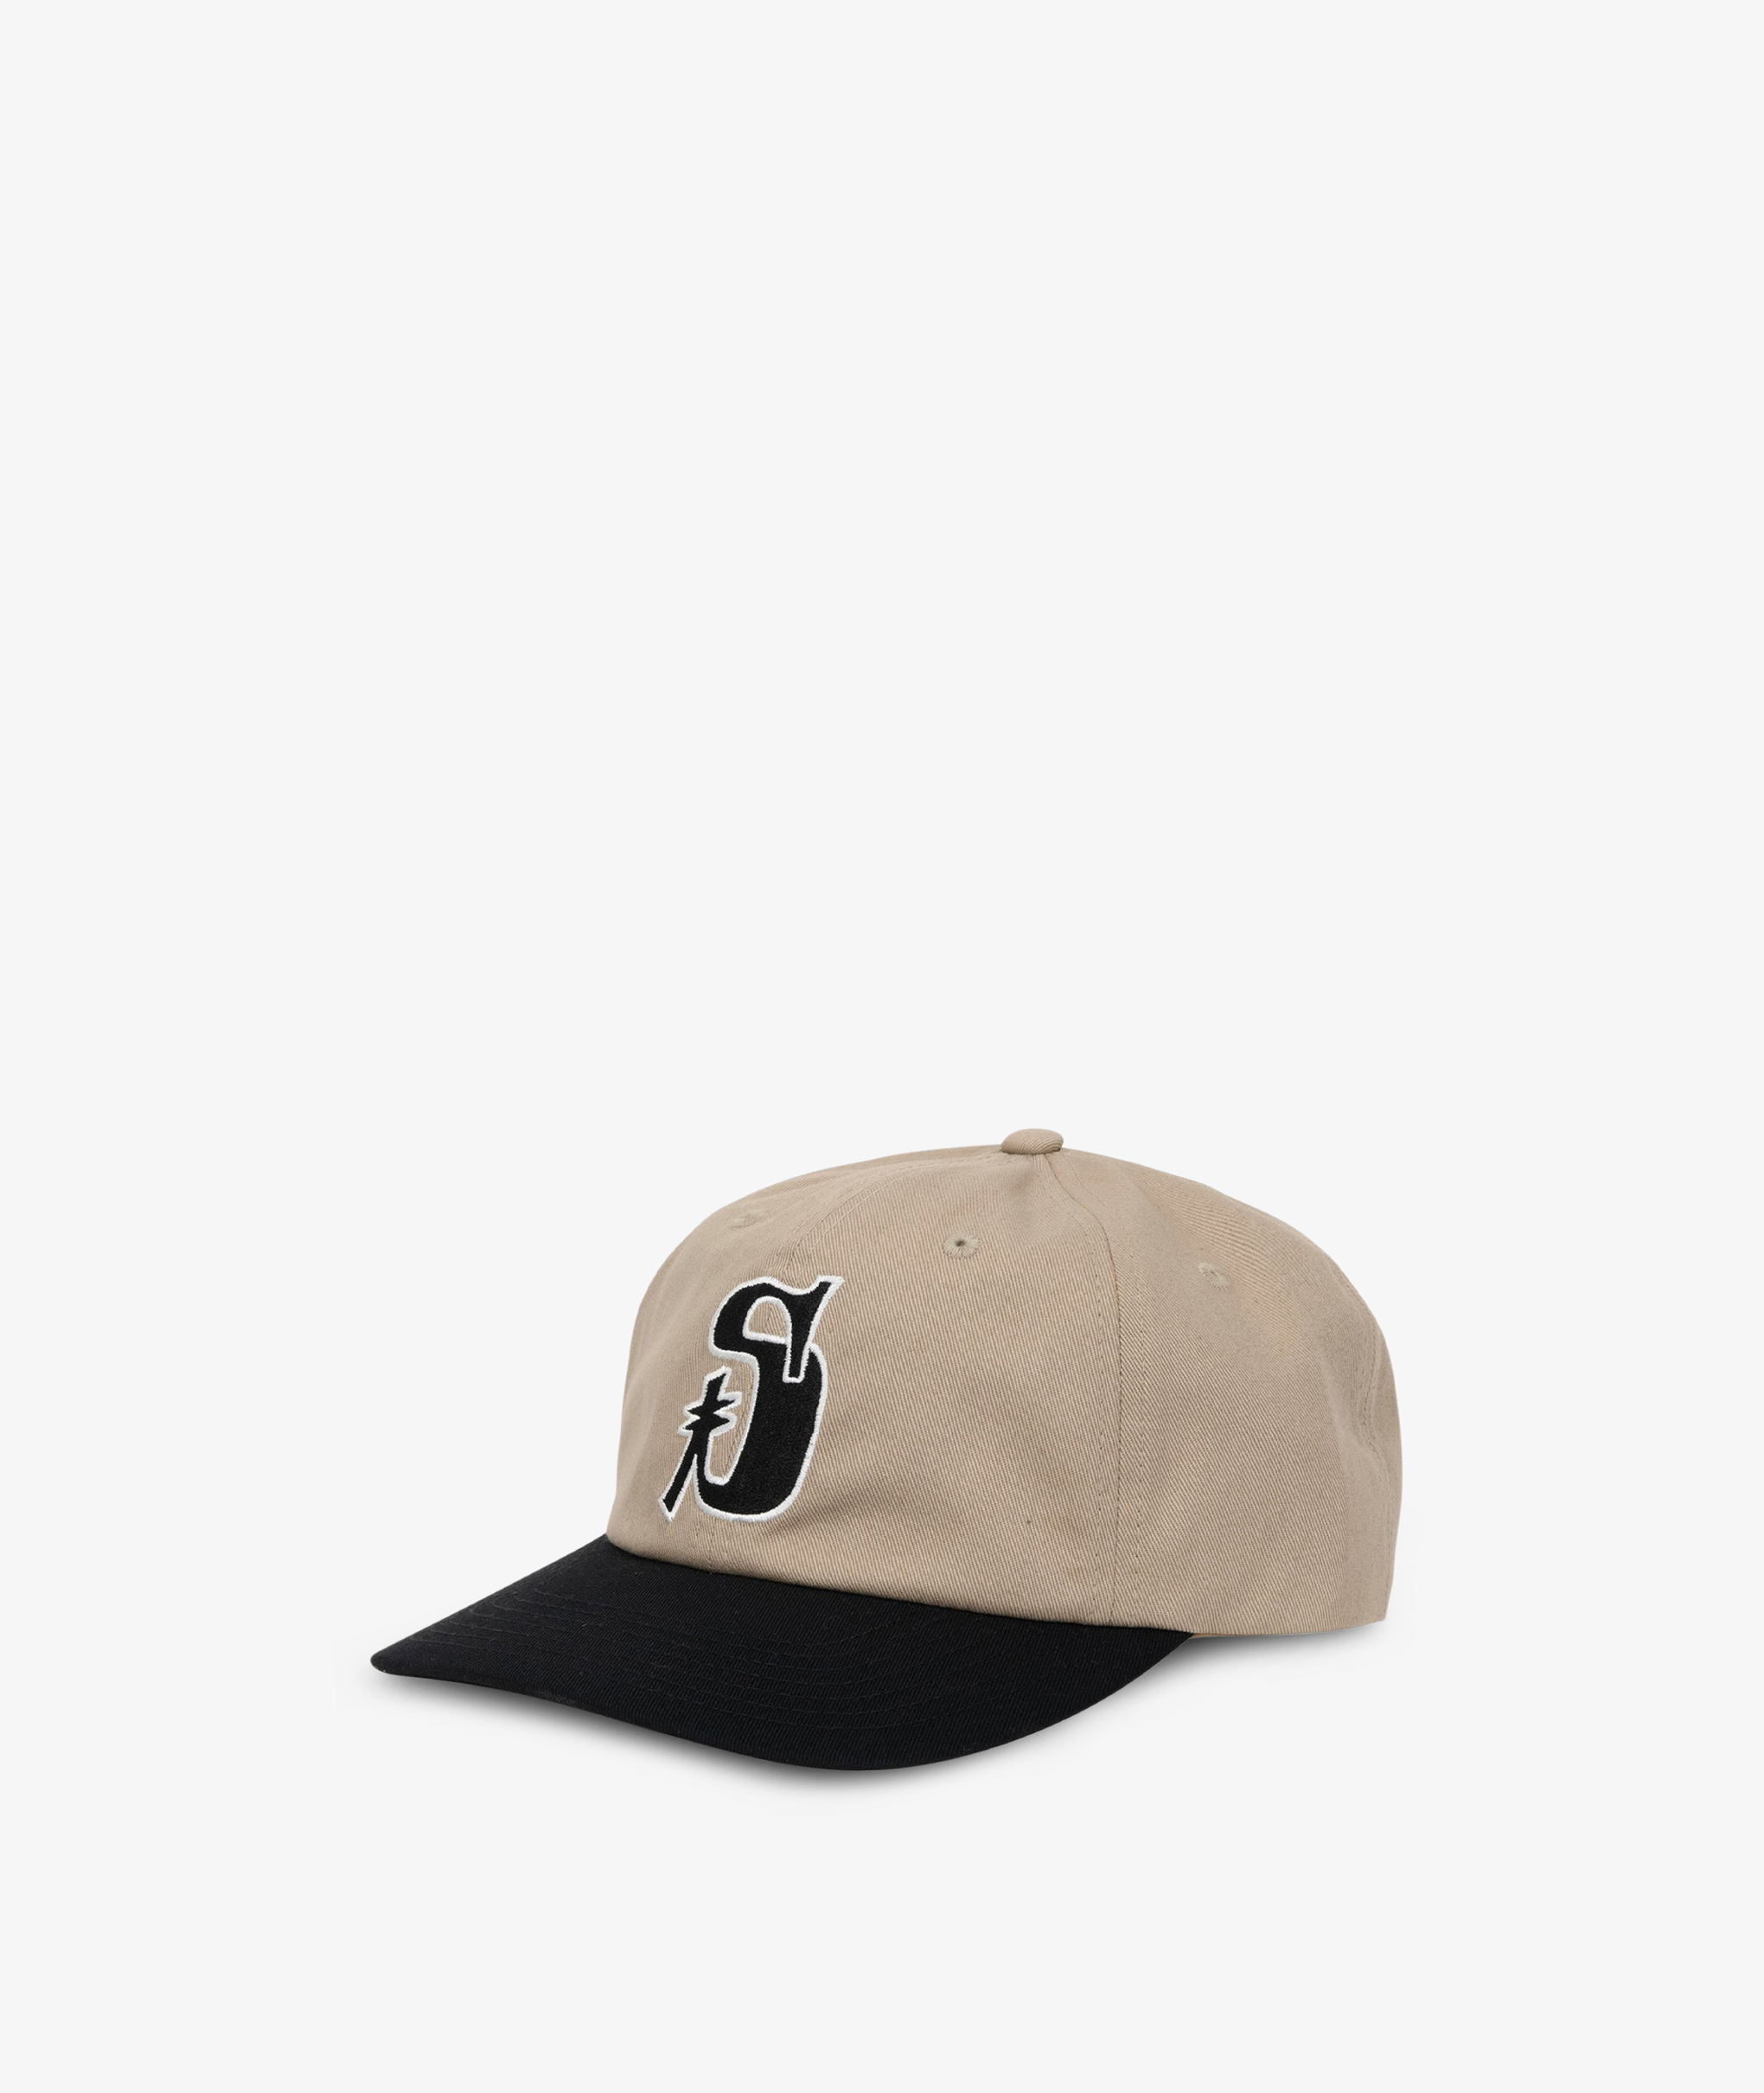 Norse Store | Shipping Worldwide - Stüssy Vintage S Low Pro Cap